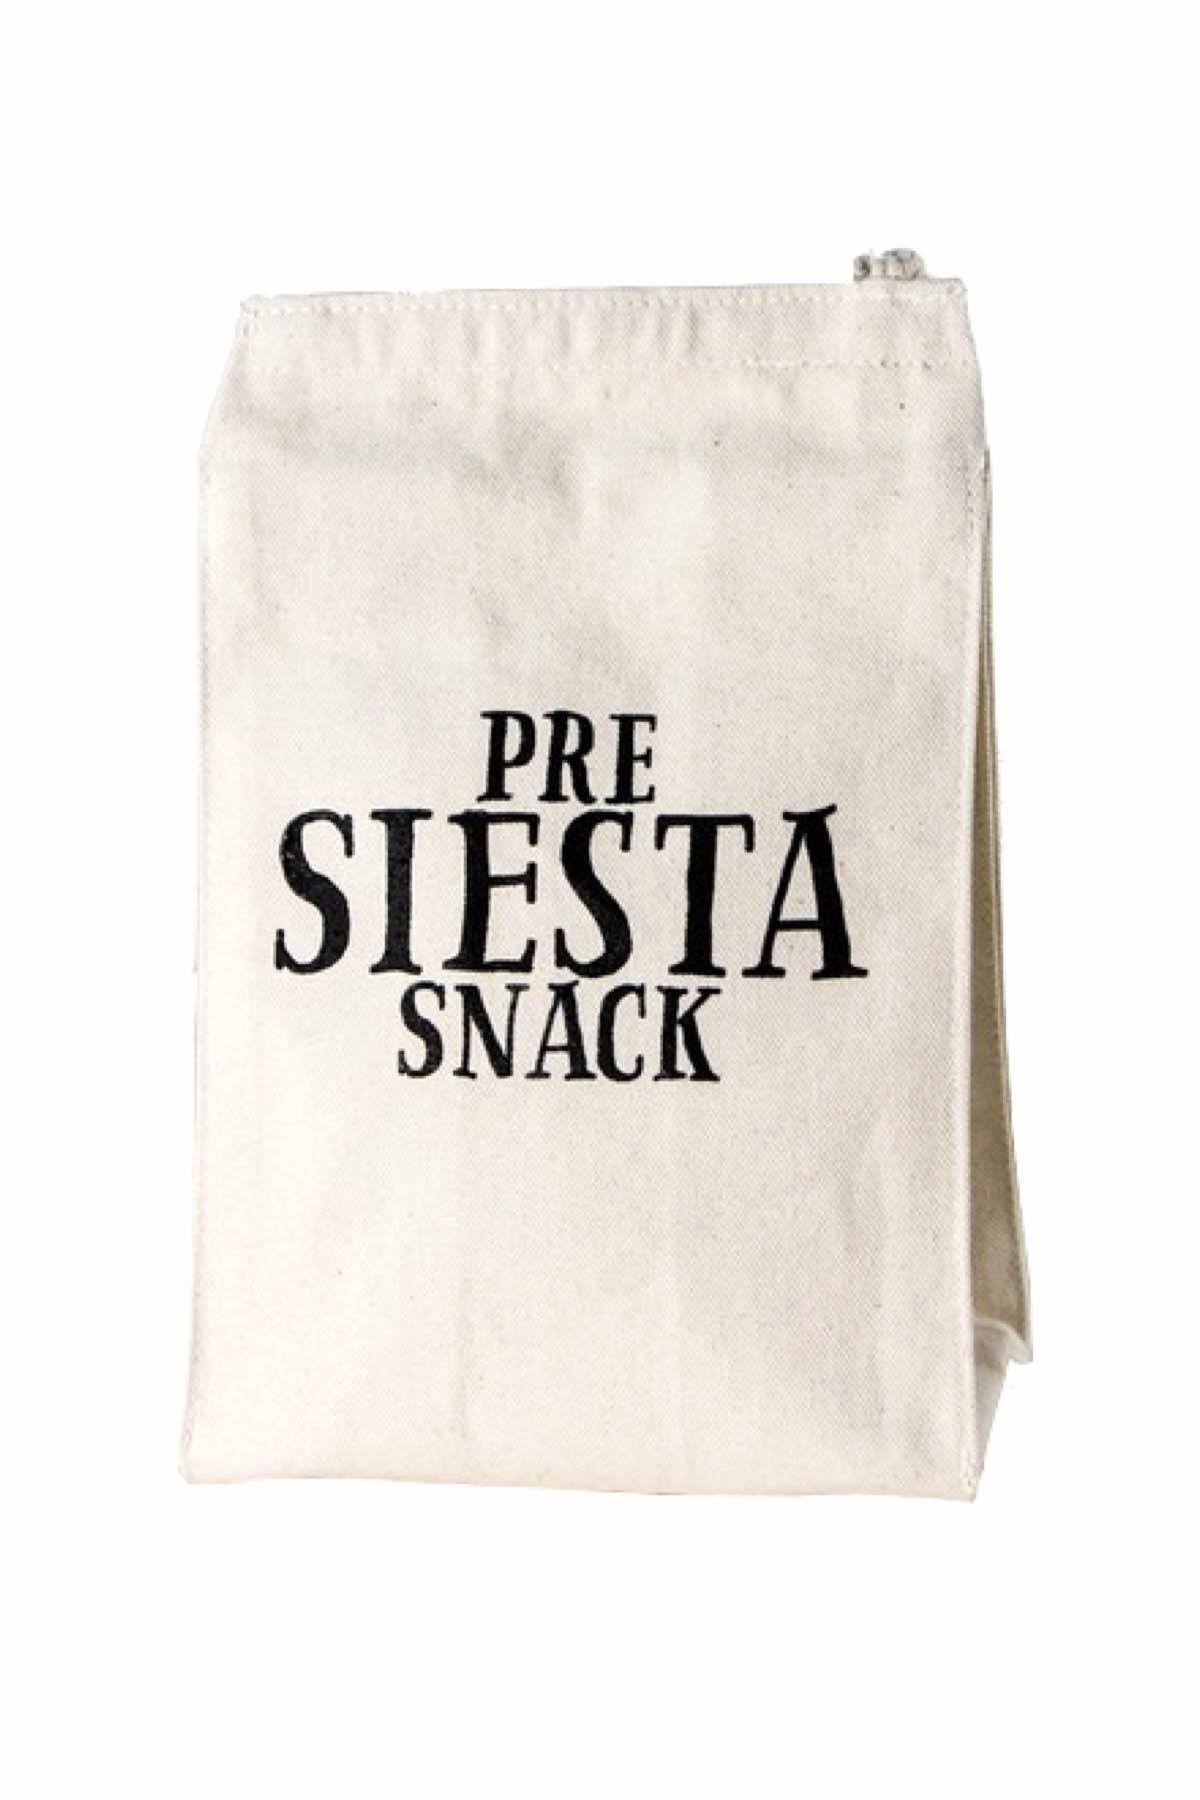 Towne9 Siesta Lunch Tote